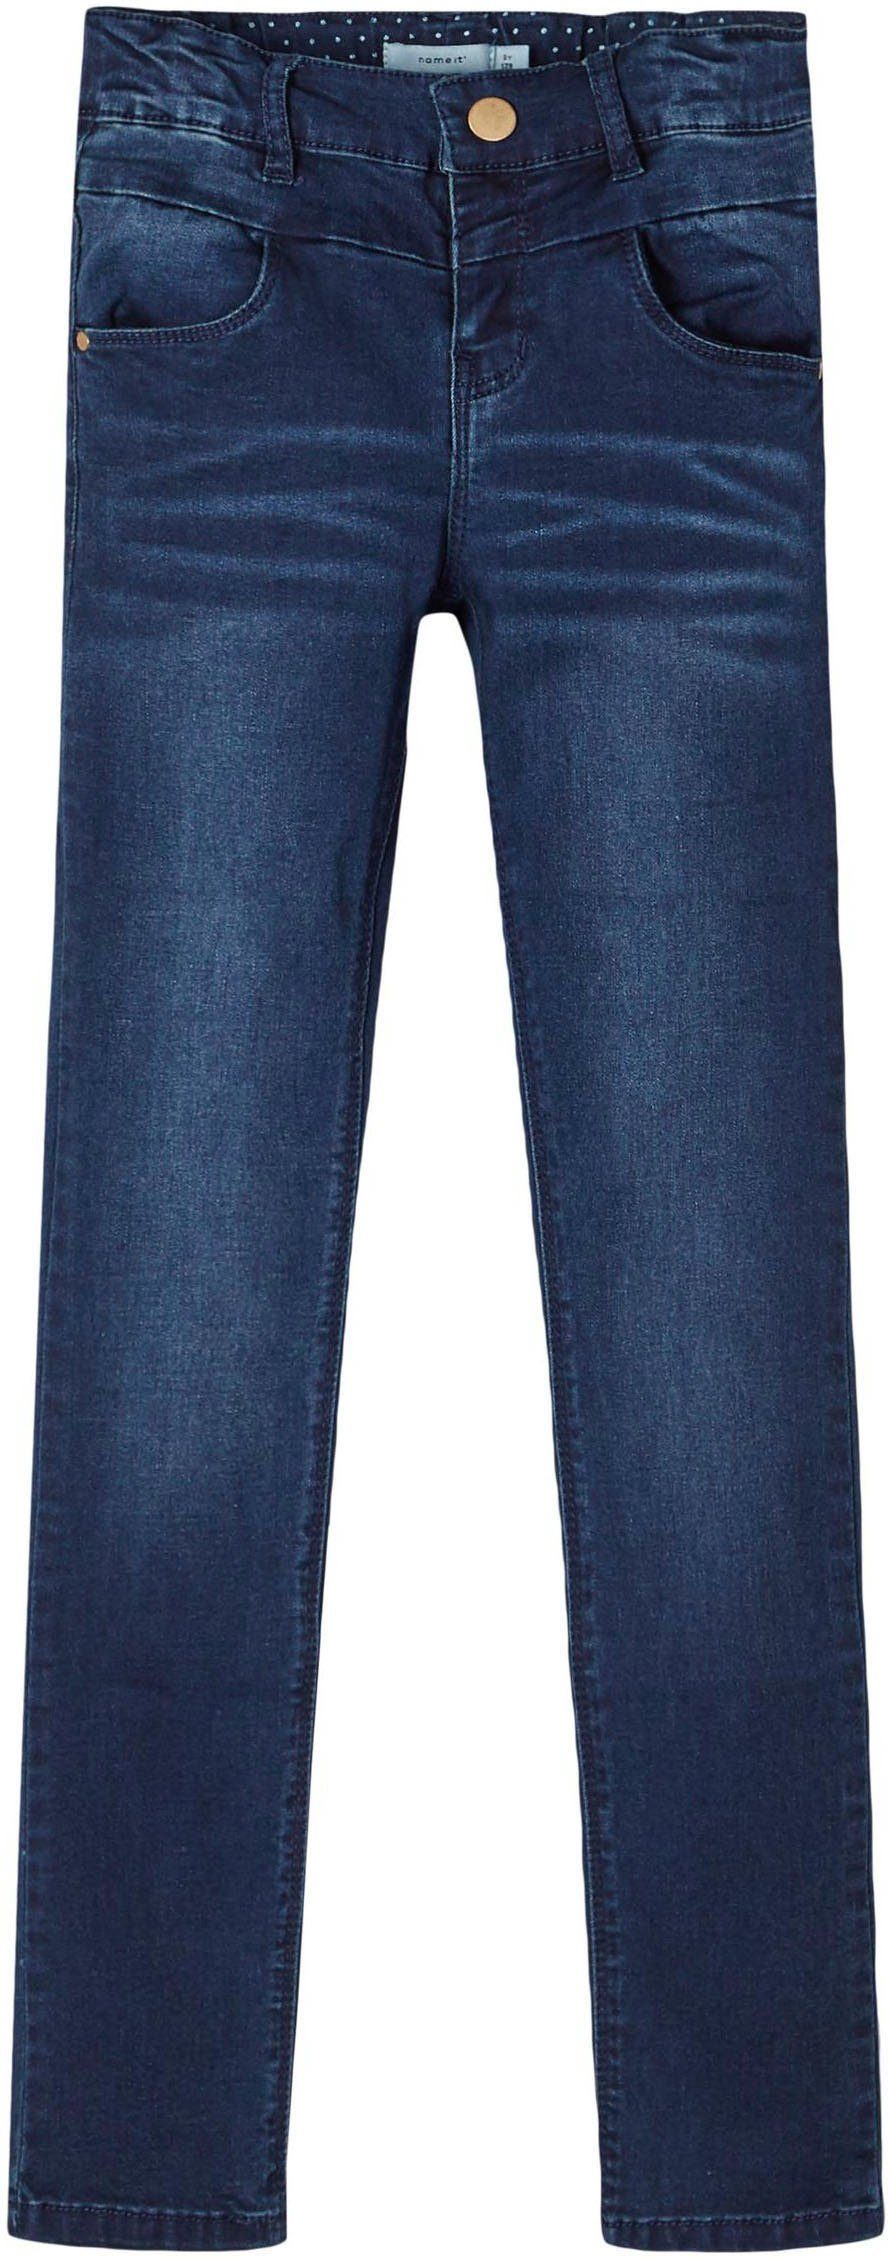 schmaler Name Stretch-Jeans in Passform NKFPOLLY It